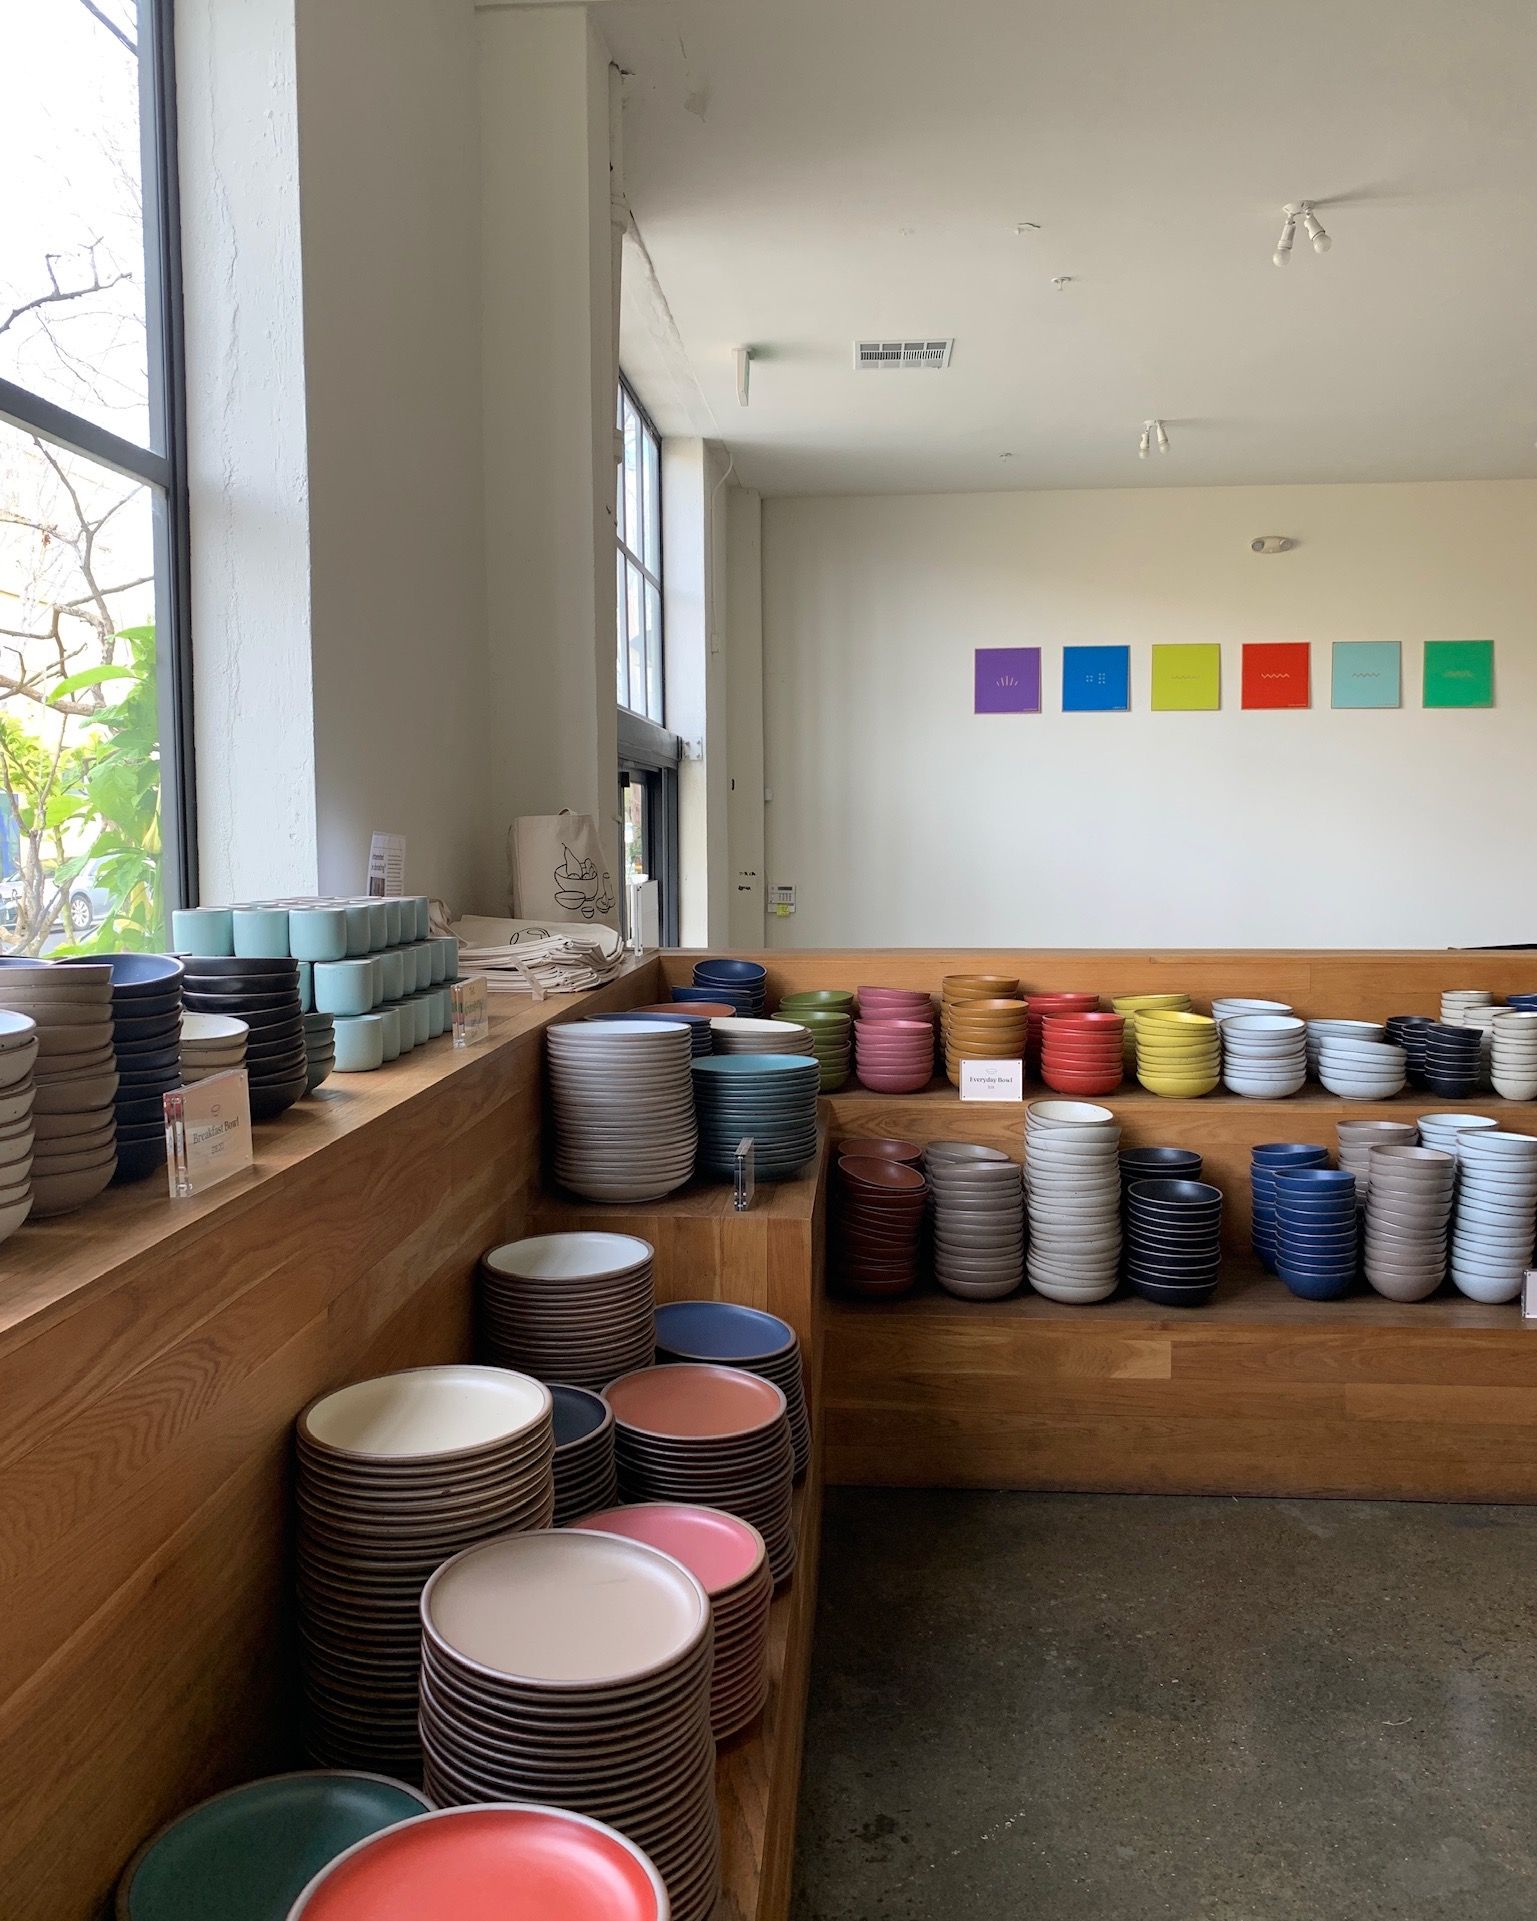 In a retail setting, there are large stacks of ceramic bowls and plates in all different colors of the rainbow arranged on shelves